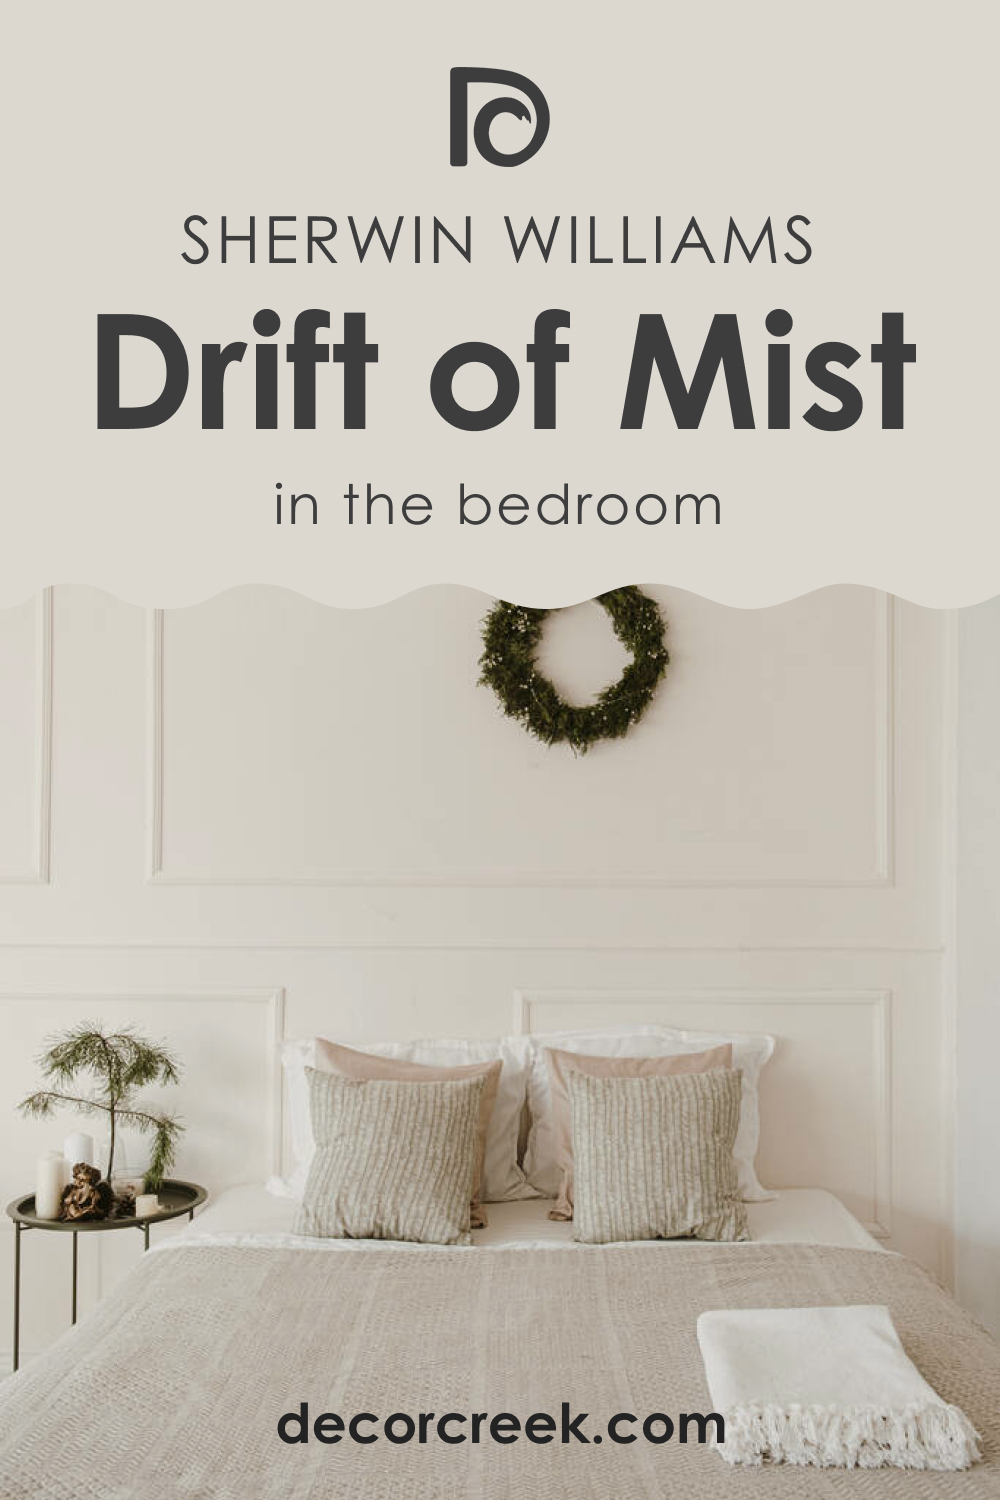 How to Use SW 9166 Drift of Mist in the Bedroom?